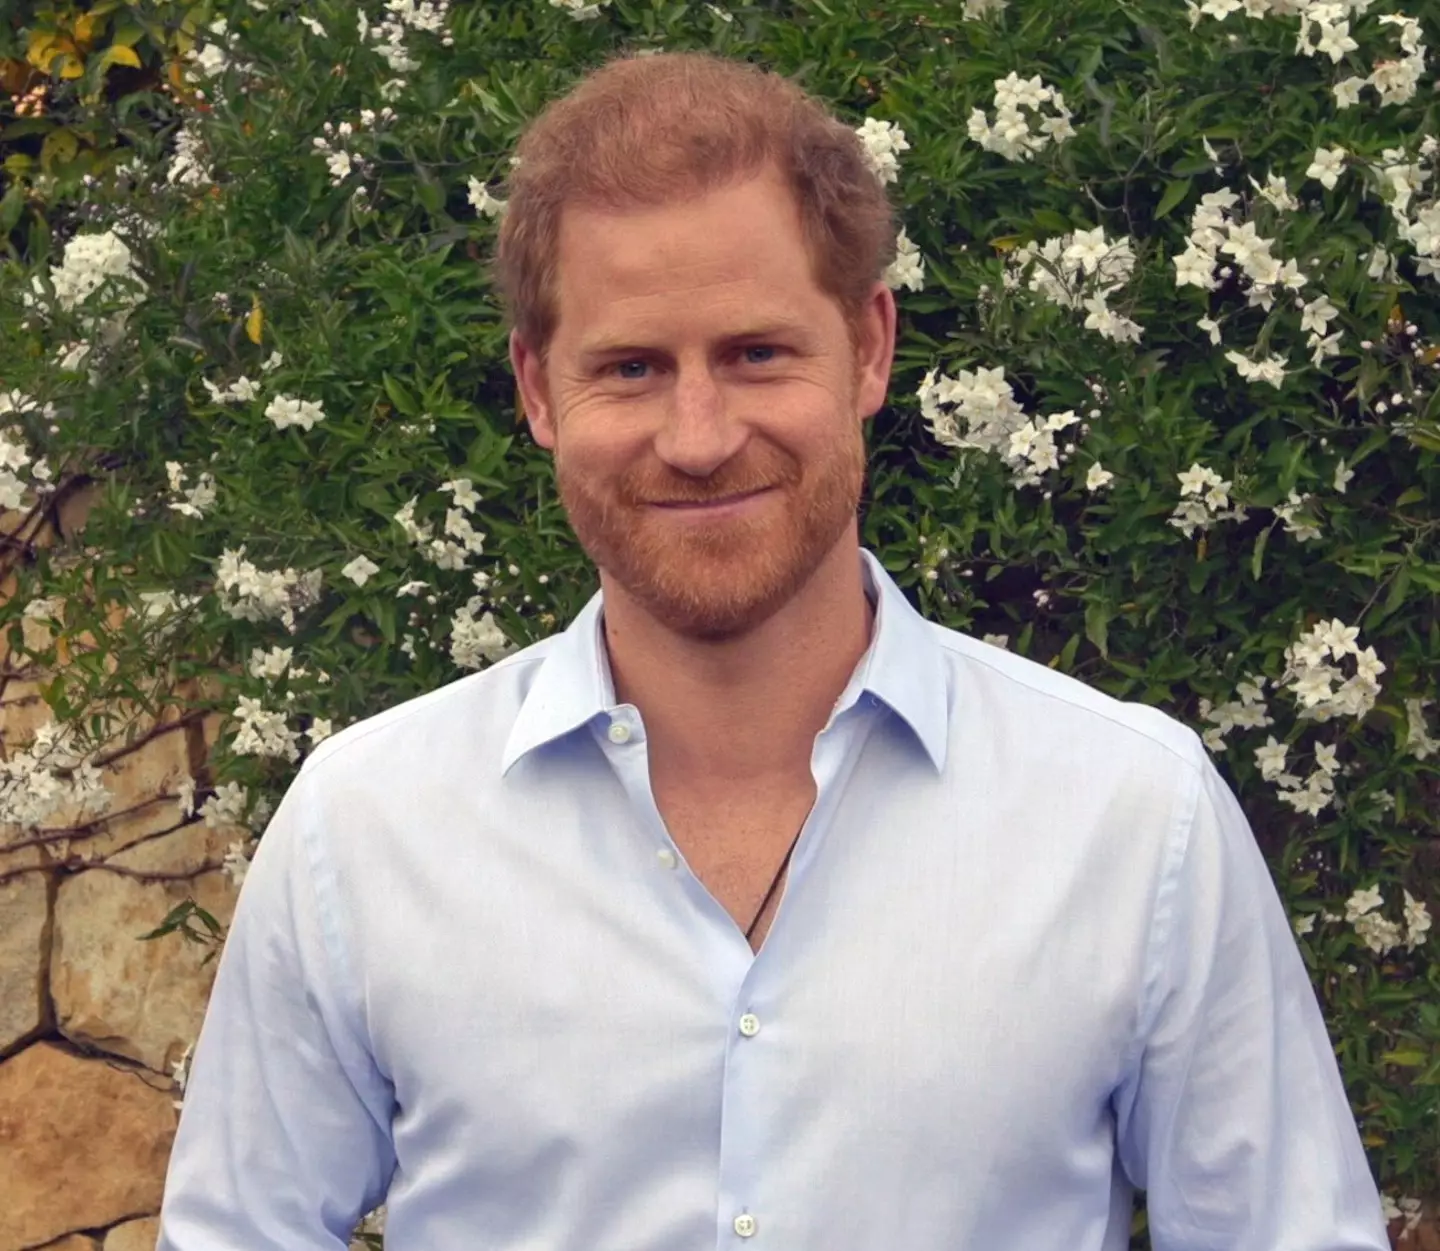 The brilliantly bizarre revelation began when customers of EsteNove in Istanbul have been demanding to look like the Duke of Sussex.